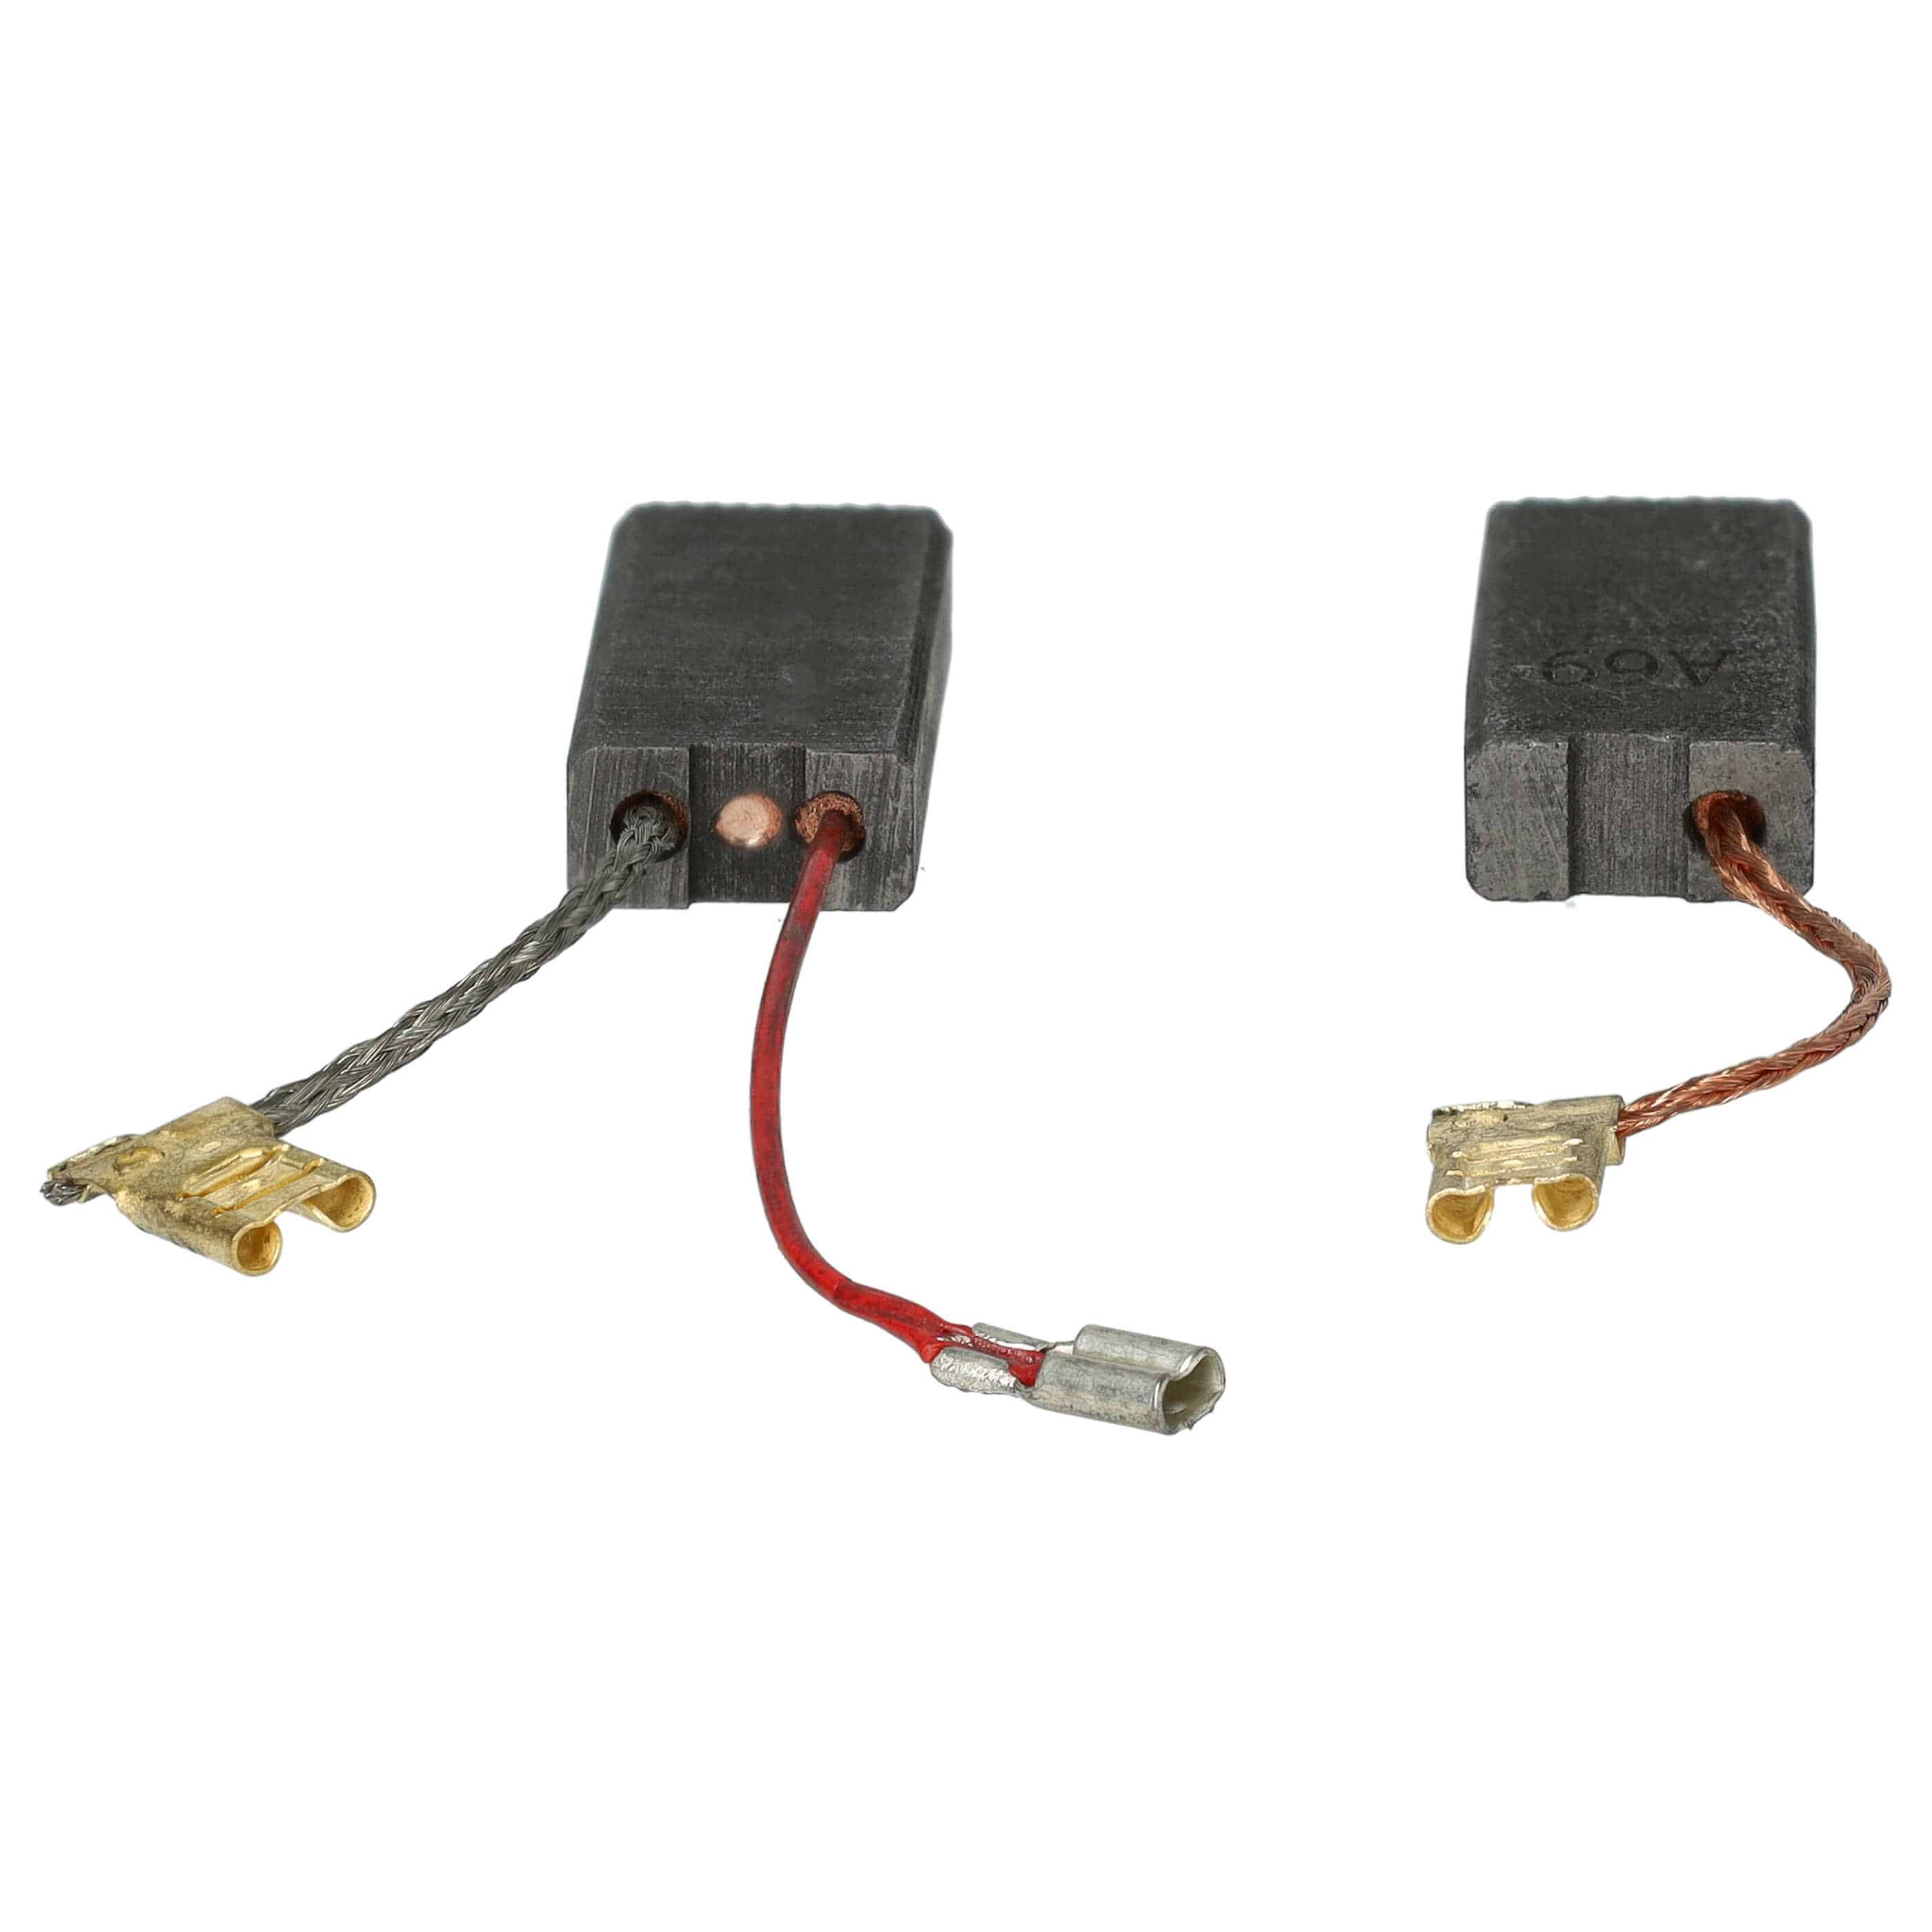 2x Carbon Brush as Replacement for Bosch 1 617 014 144 Electric Power Tools + Connector, 23 x 12.3 x 6.2mm